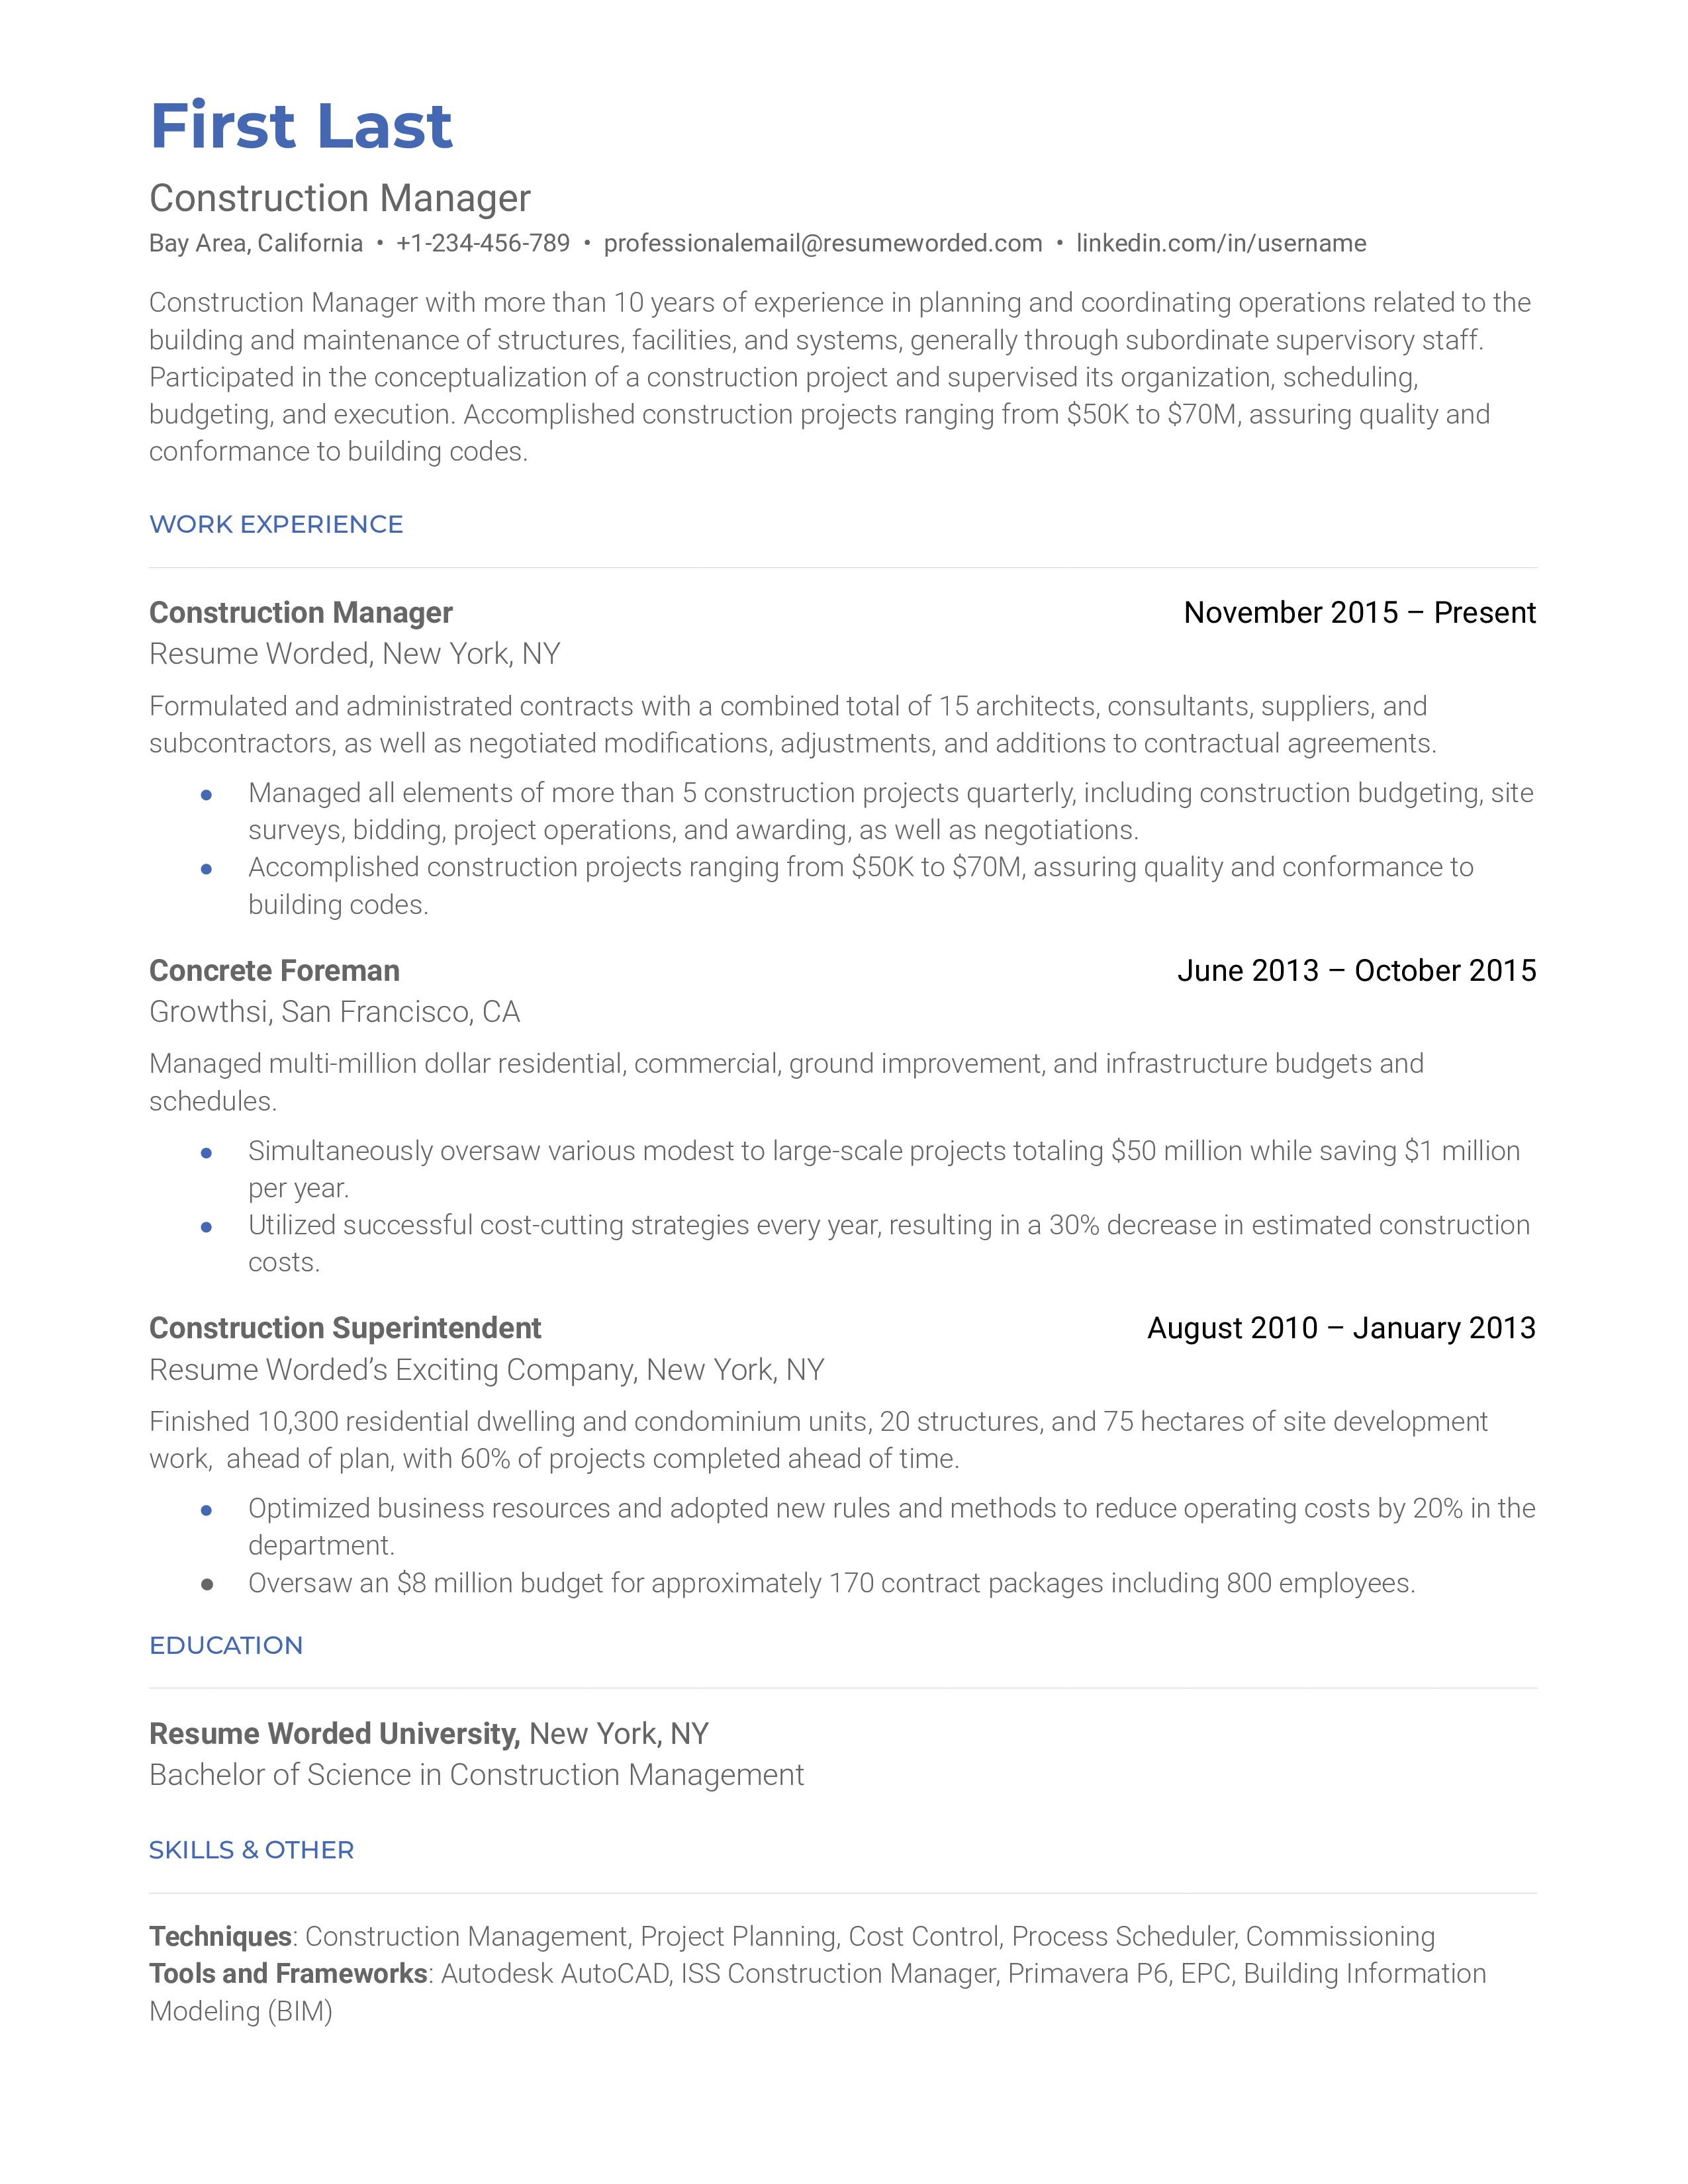 A CV for a Construction Manager showcasing digital proficiency and sustainable construction knowledge.